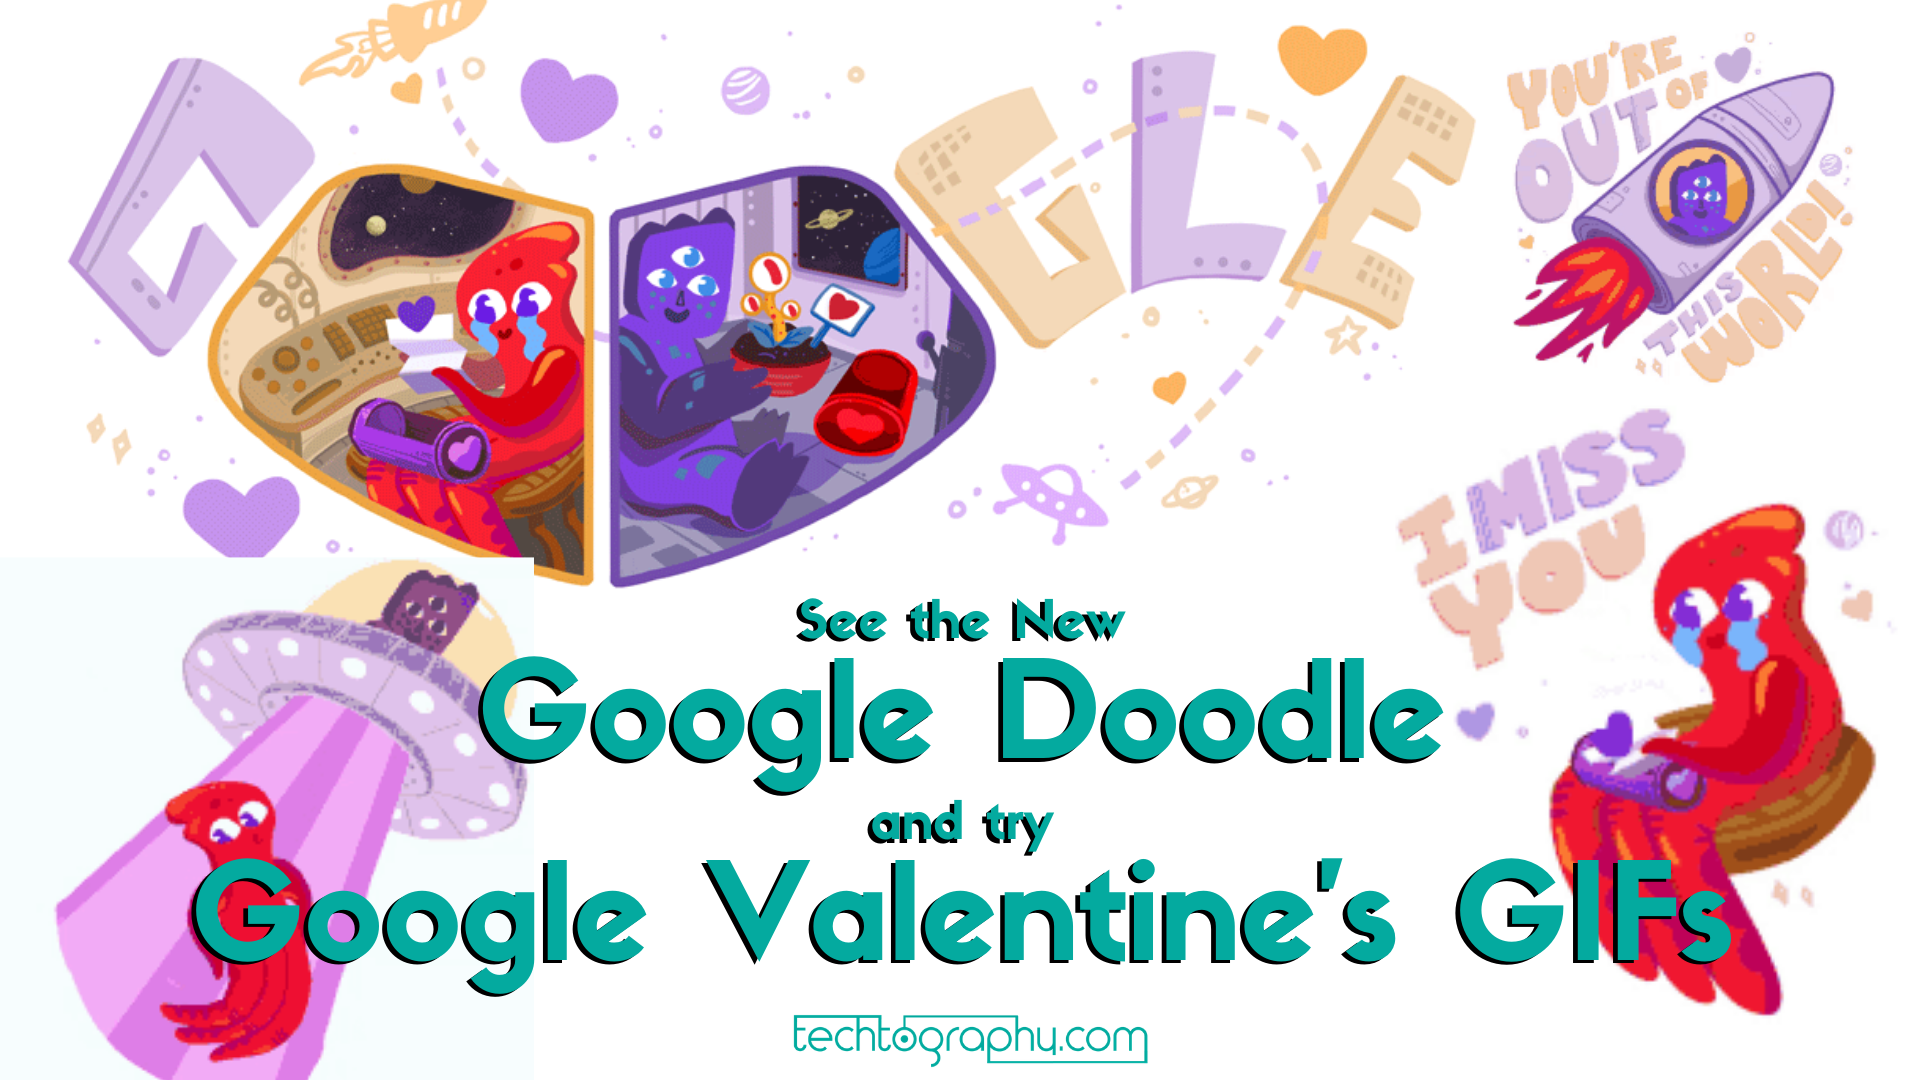 See the New Google Doodle and try Google Valentine’s GIFs